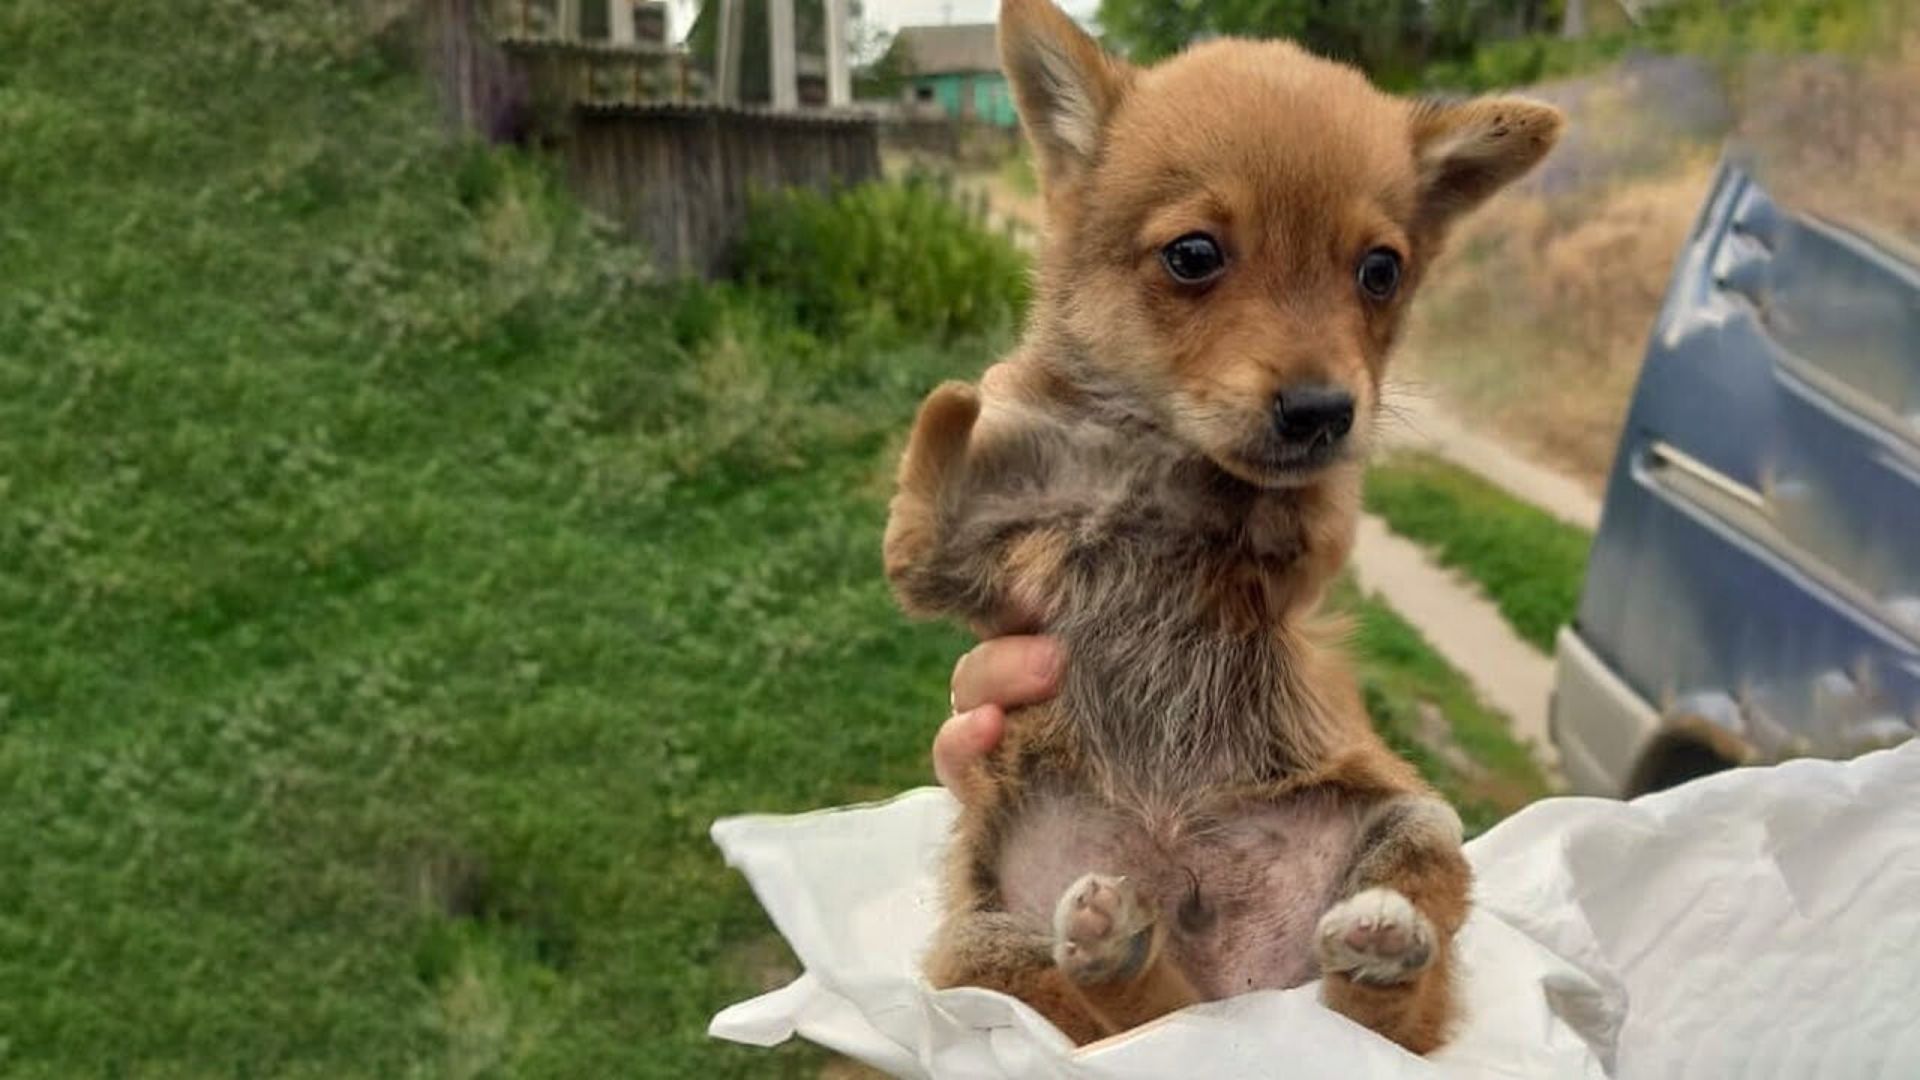 Rescuers Were Saddened To See This Puppy With No Legs In The Trash So They Went To Help